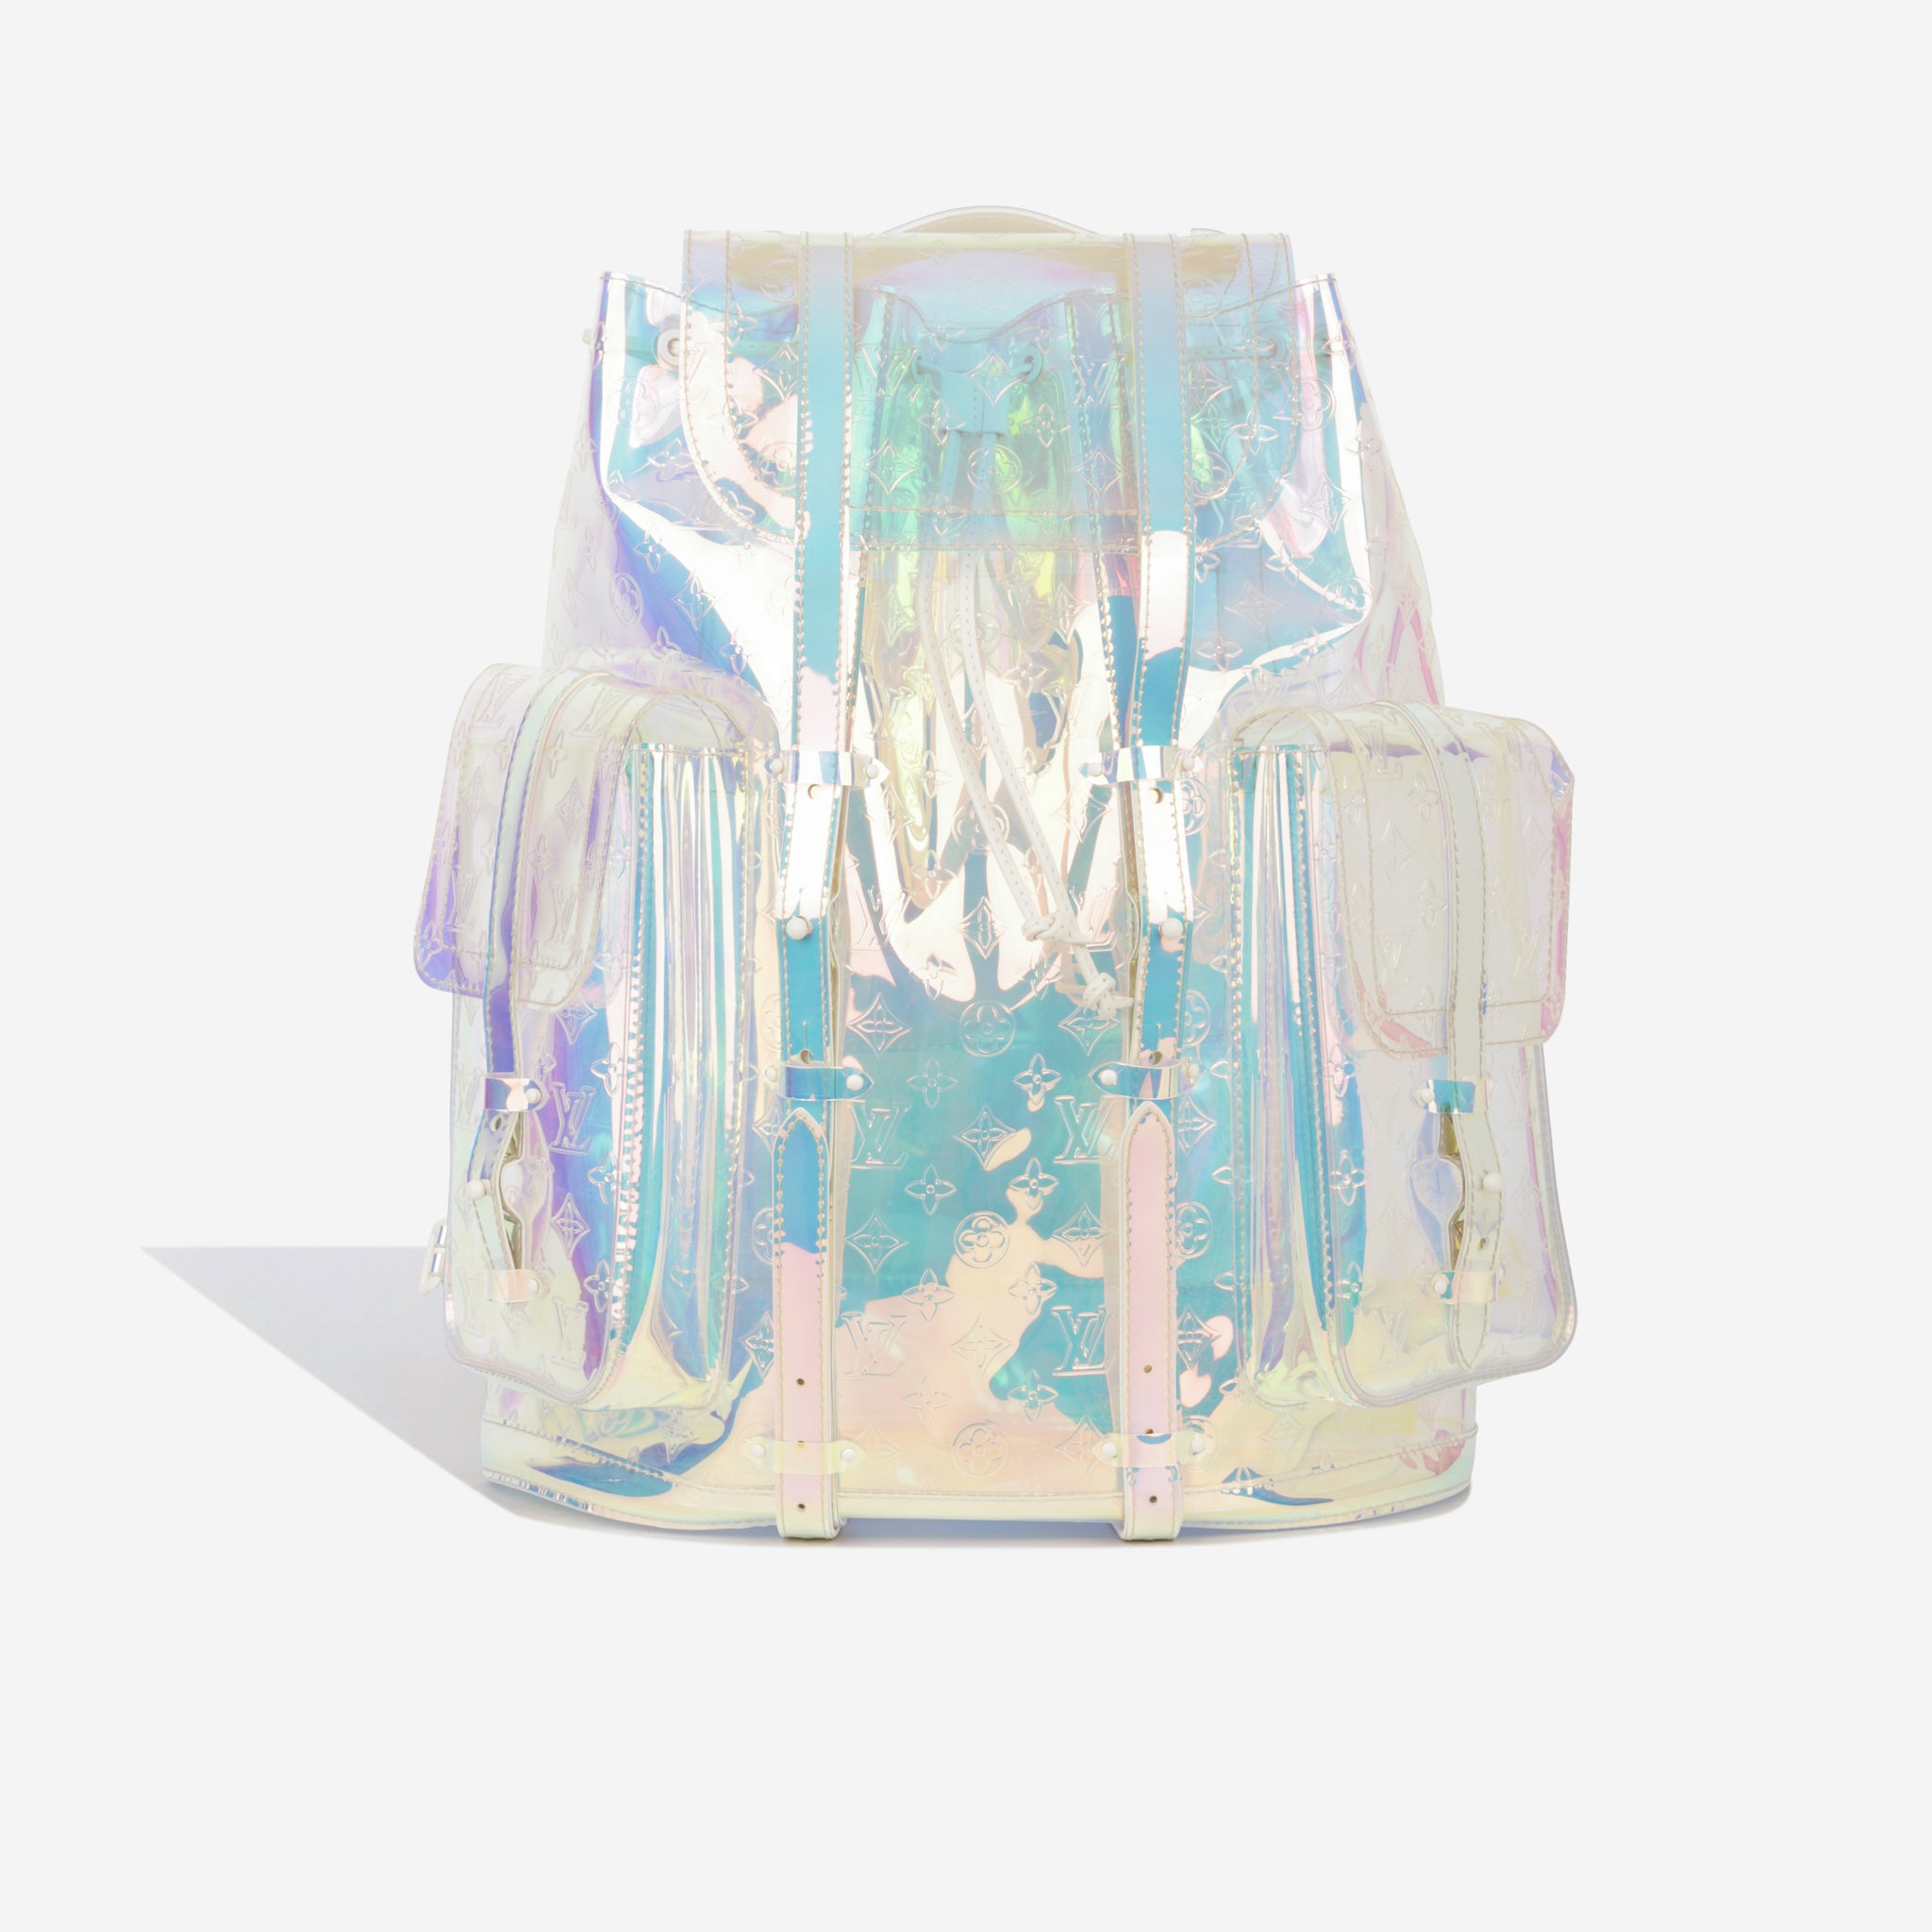 A LIMITED EDITION PRISM MONOGRAM PVC CHRISTOPHER GM BACKPACK BY VIRGIL  ABLOH, LOUIS VUITTON, 2019